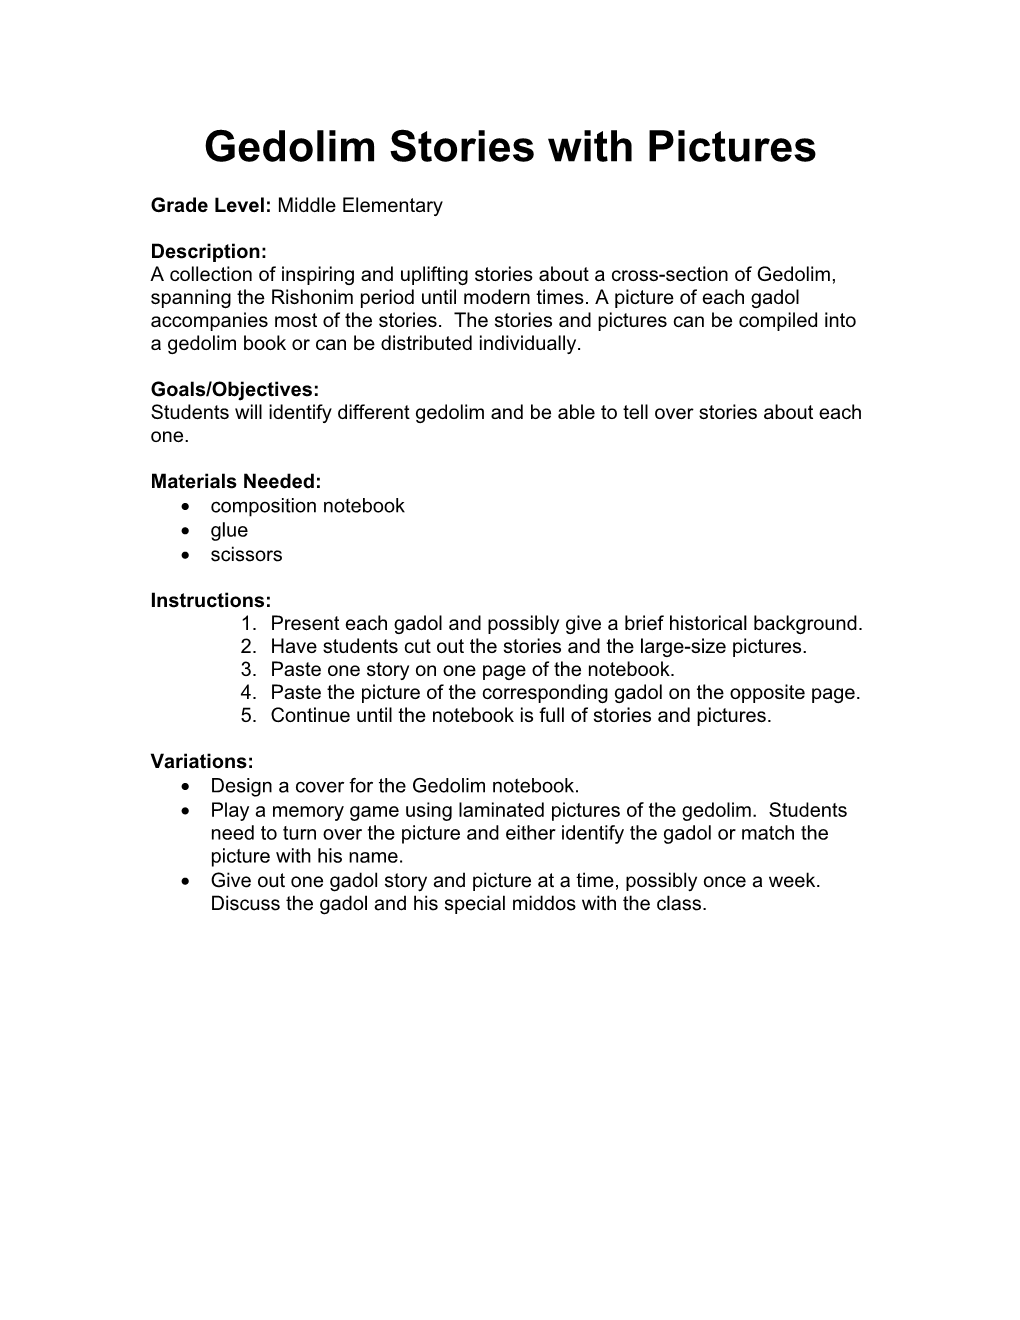 Gedolim Stories with Pictures